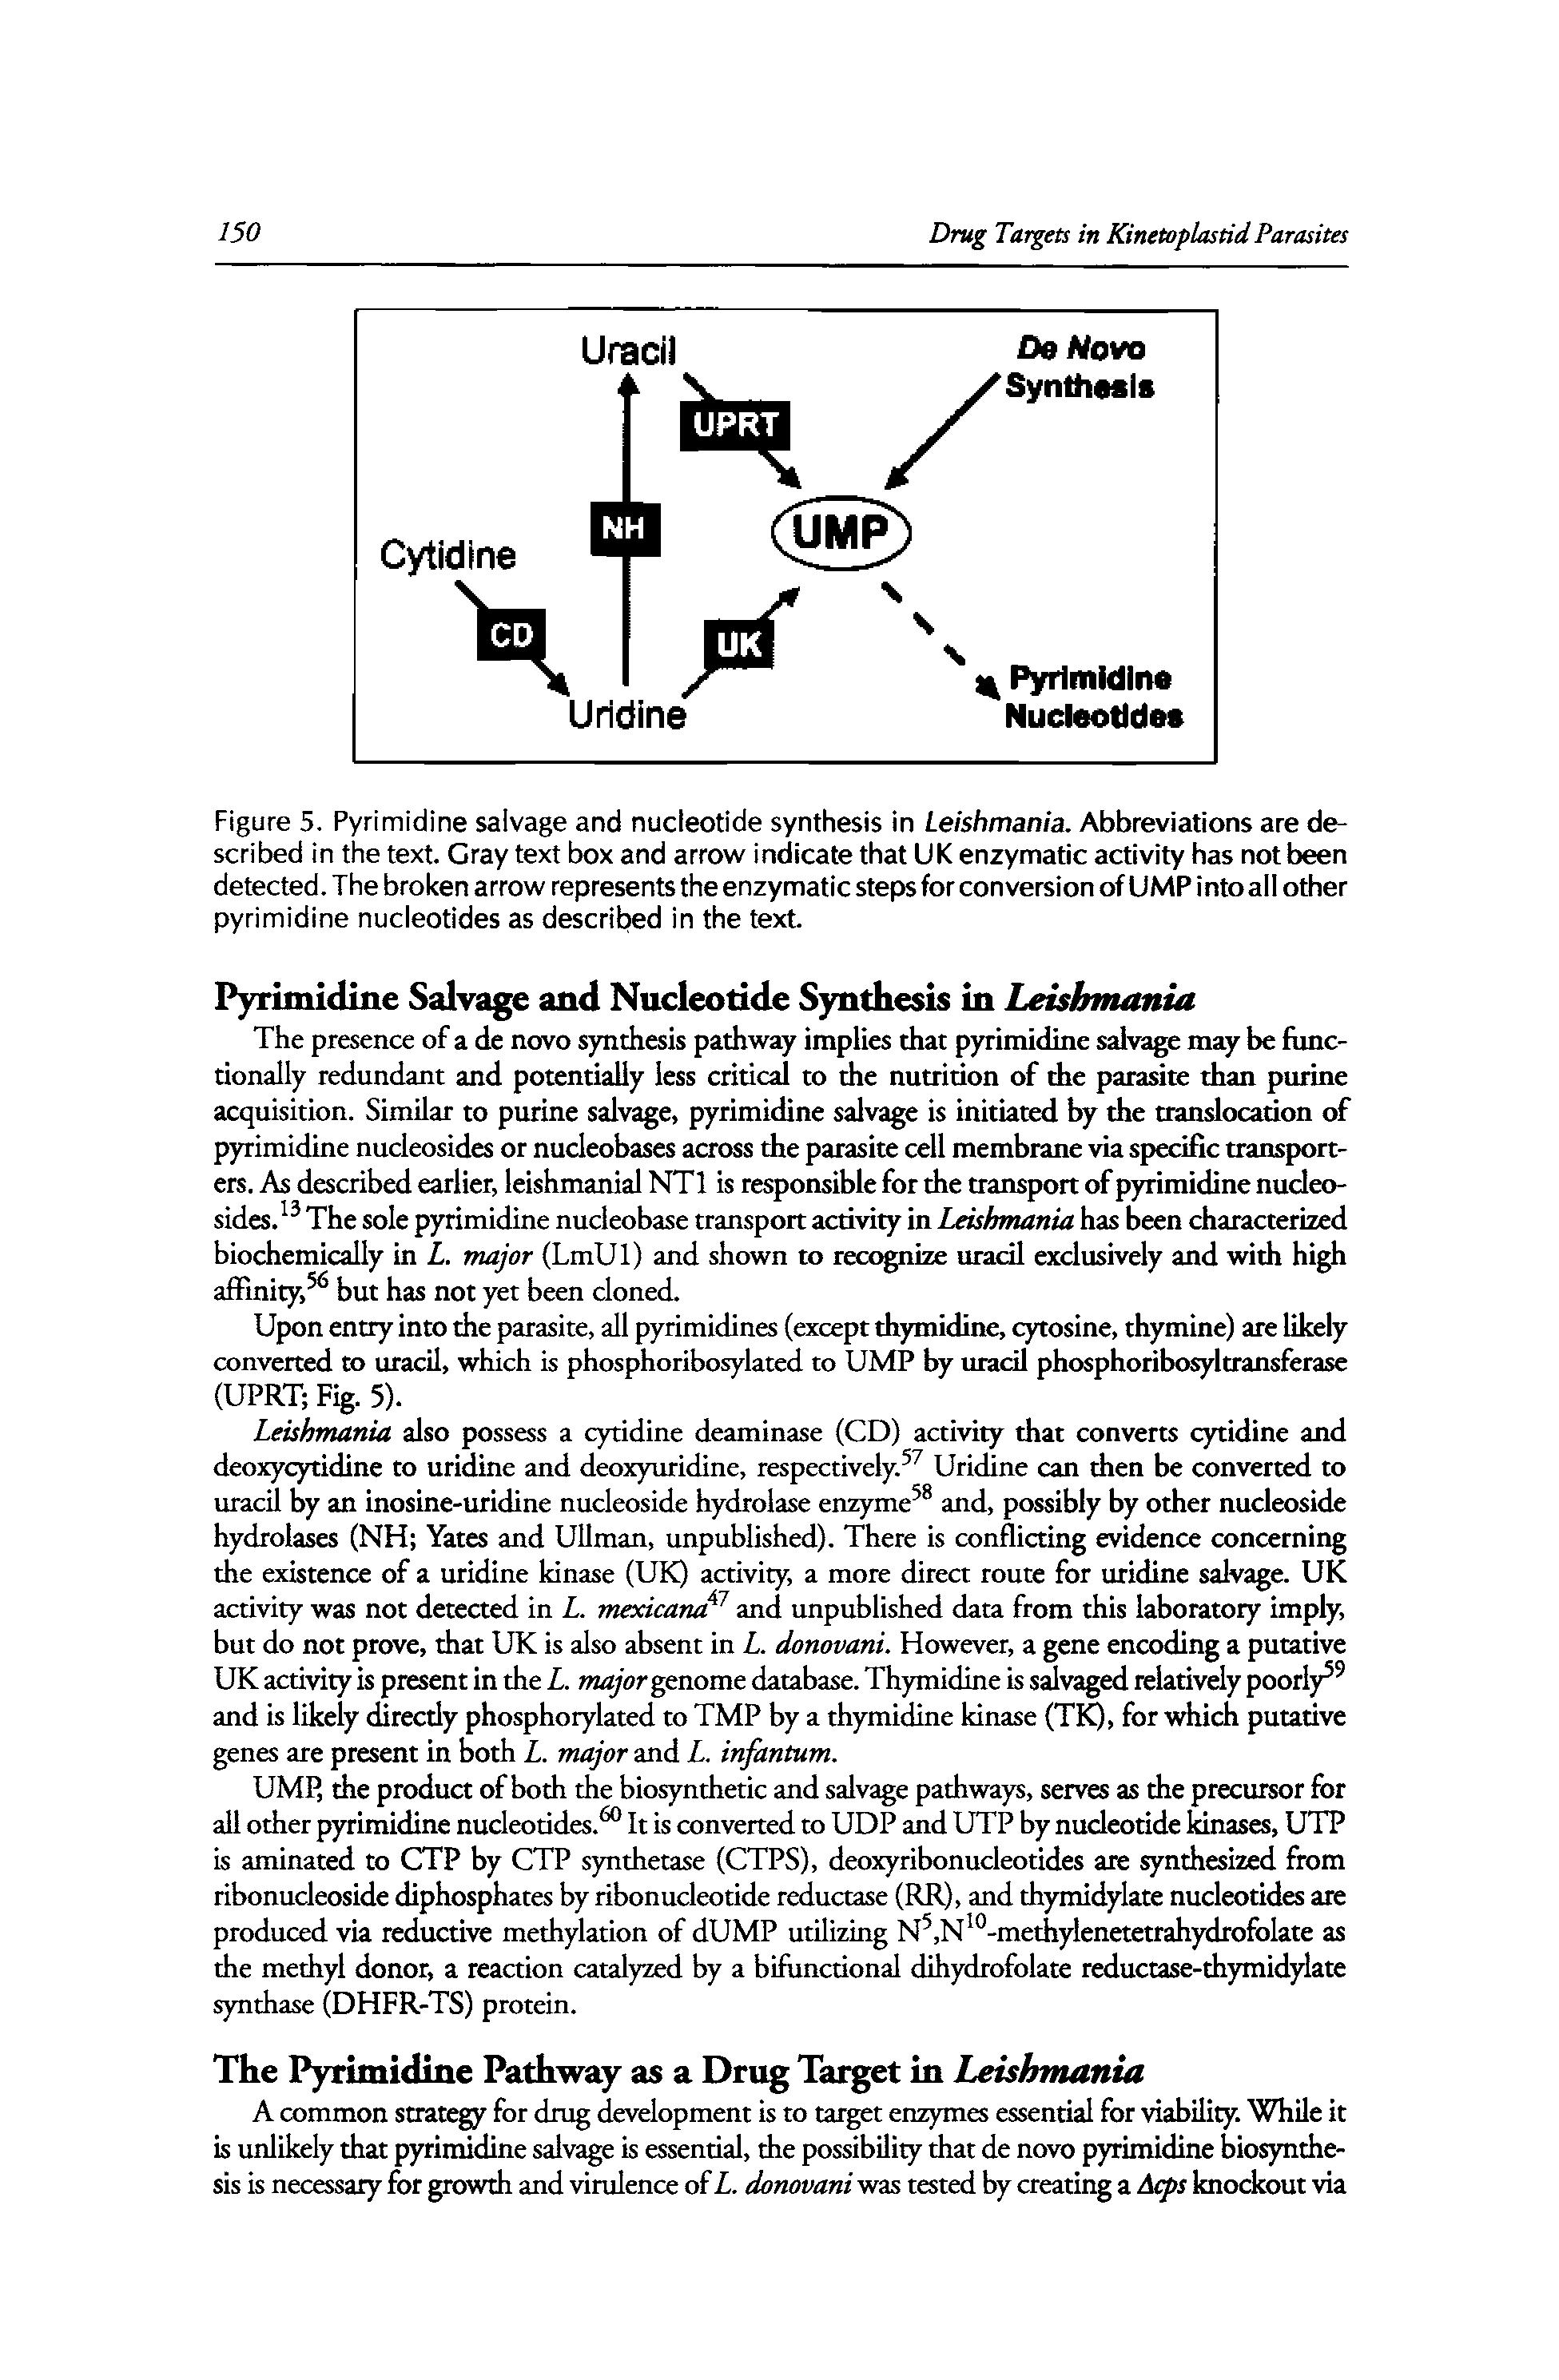 Figure 5. Pyrimidine salvage and nucleotide synthesis in Leishmania. Abbreviations are described in the text. Cray text box and arrow indicate that UK enzymatic activity has not been detected. The broken arrow represents the enzymatic steps for conversion of UMP intoall other pyrimidine nucleotides as described in the text.